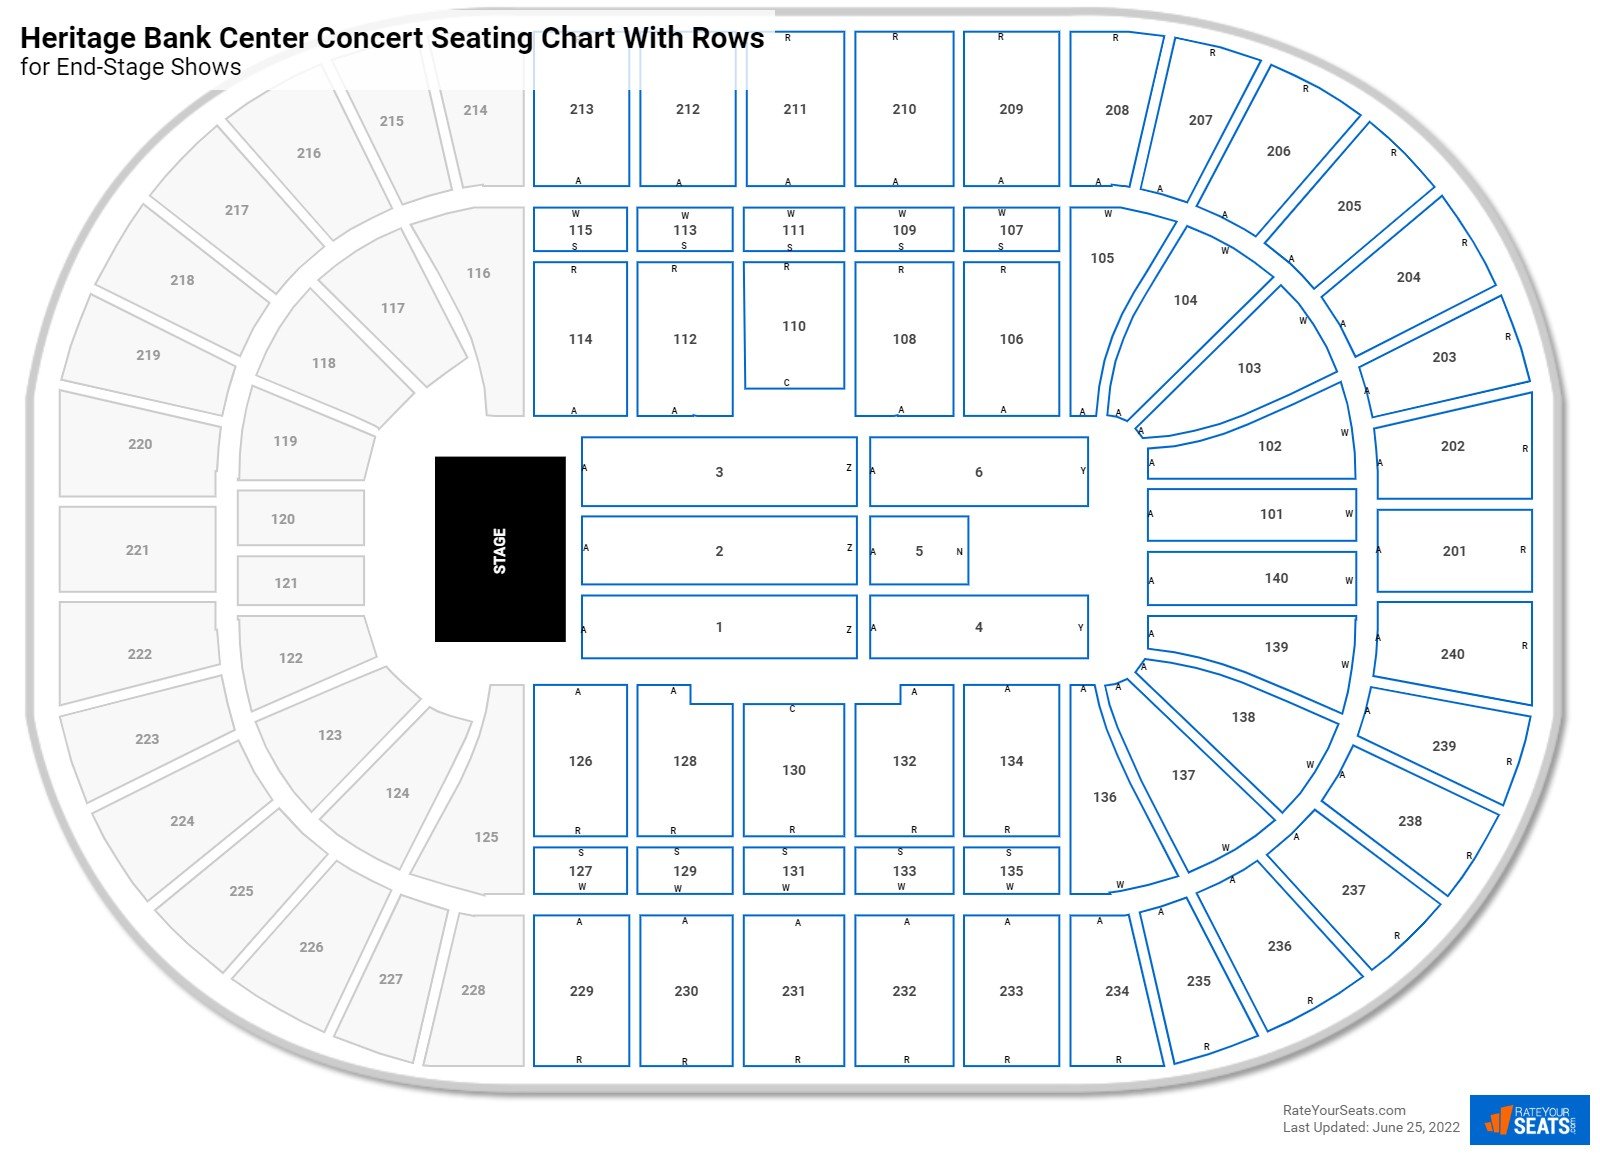 Heritage Bank Center seating chart with row numbers